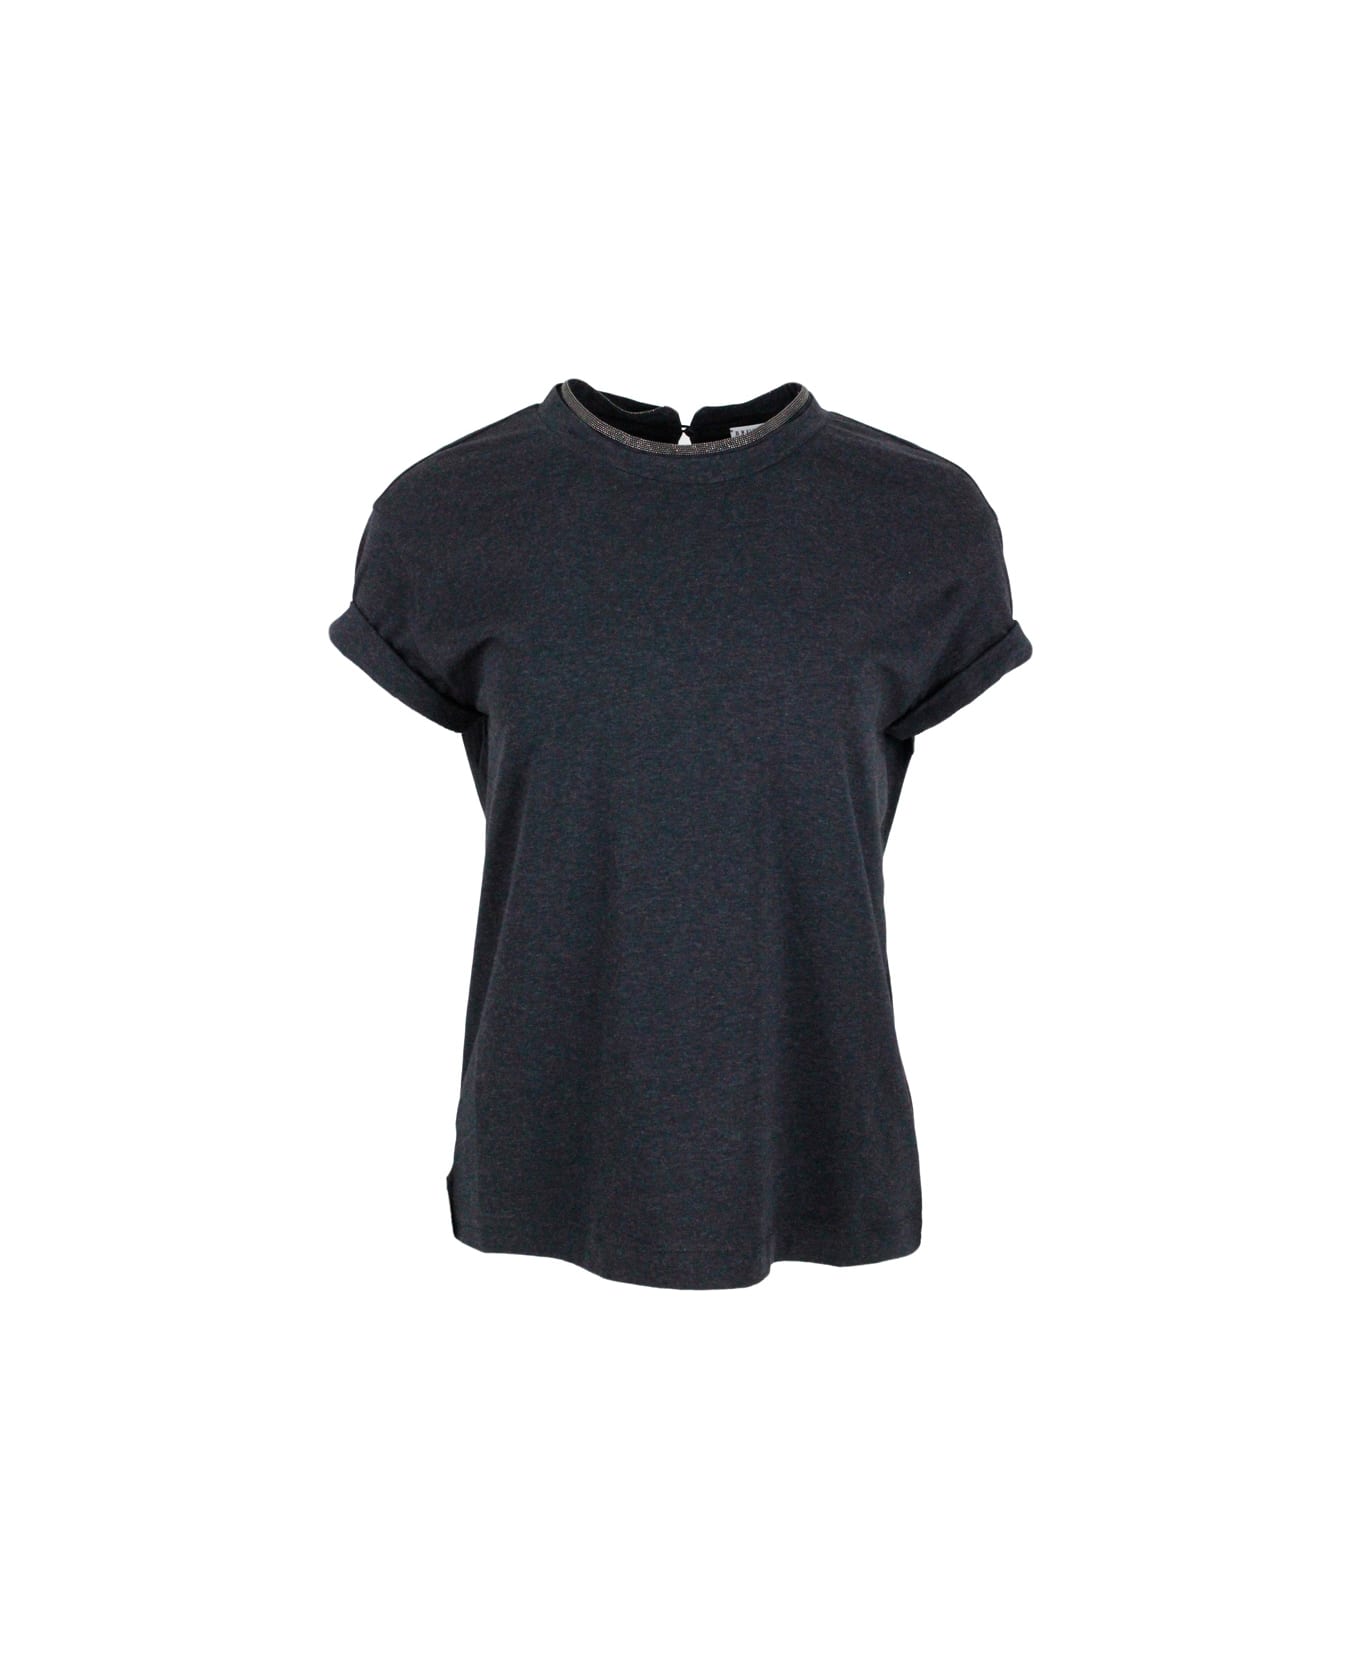 Brunello Cucinelli Short-sleeved T-shirt In Elasticized Stretch Cotton With A Crew Neck Edged With Jewels - Grey Antracite